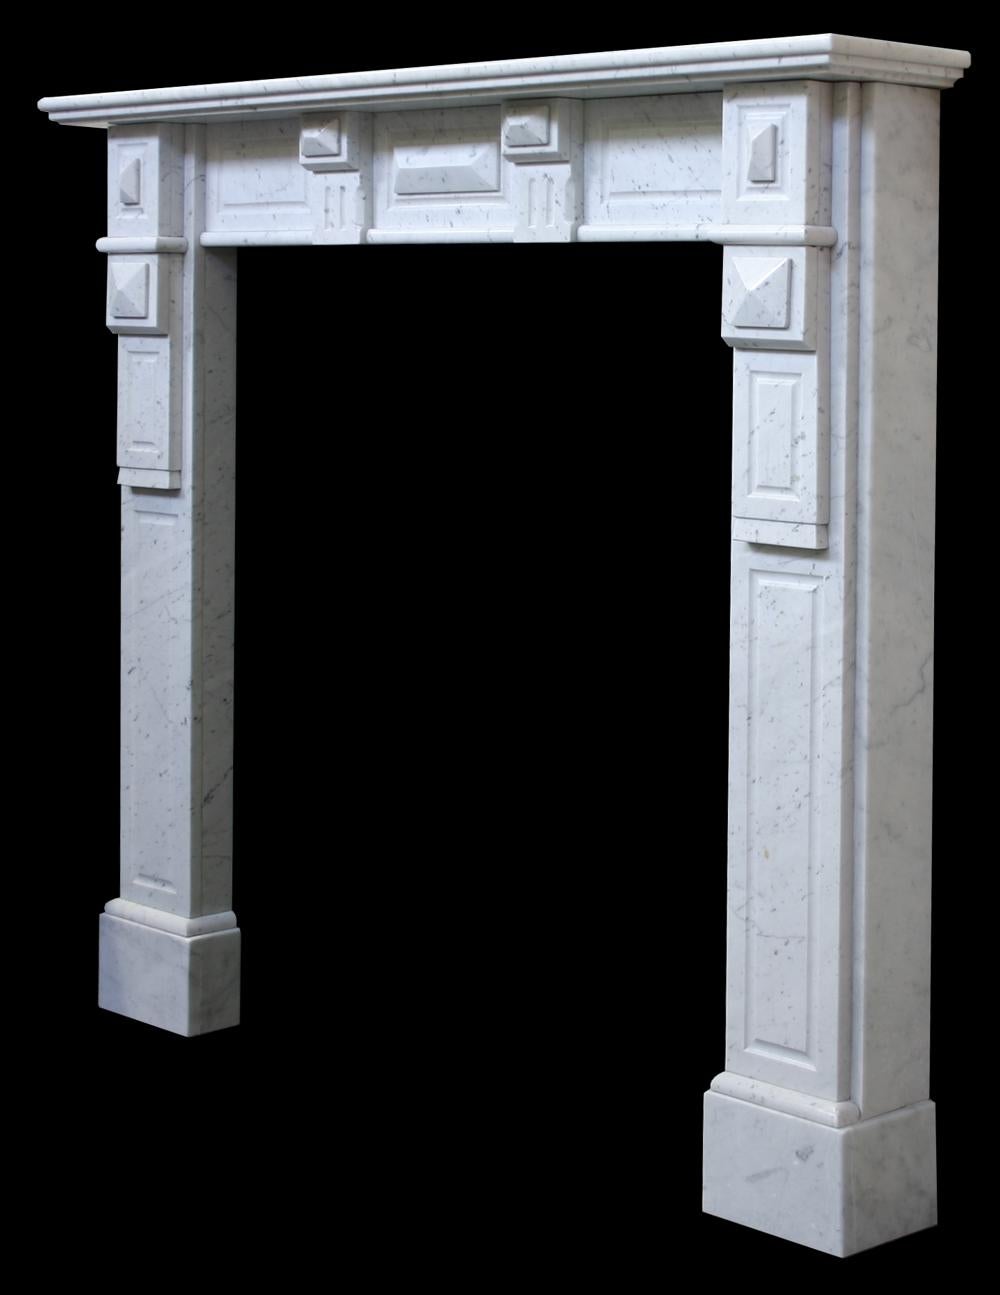 Antique continental Carara marble fire surround with fluted legs terminating in geometric corbels decorated with lozenges. The frieze has two simple corbels also decorated with lozenges, circa 1900.